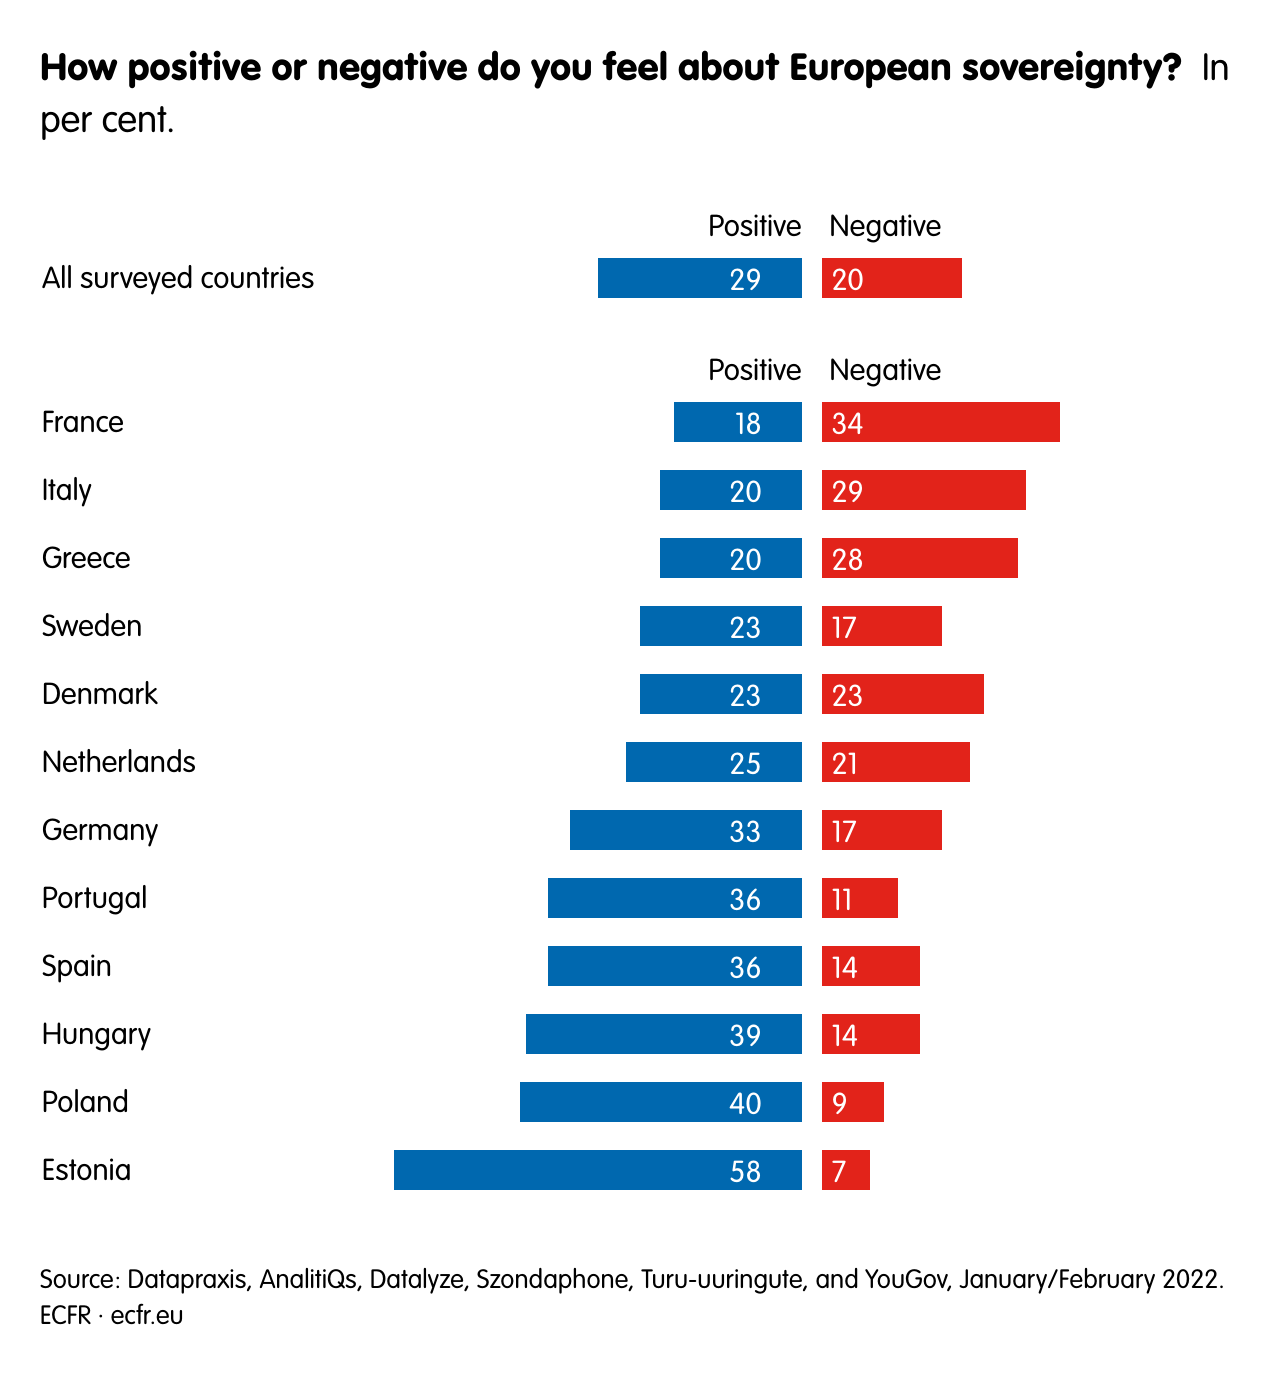 How positive or negative do you feel about European sovereignty? 